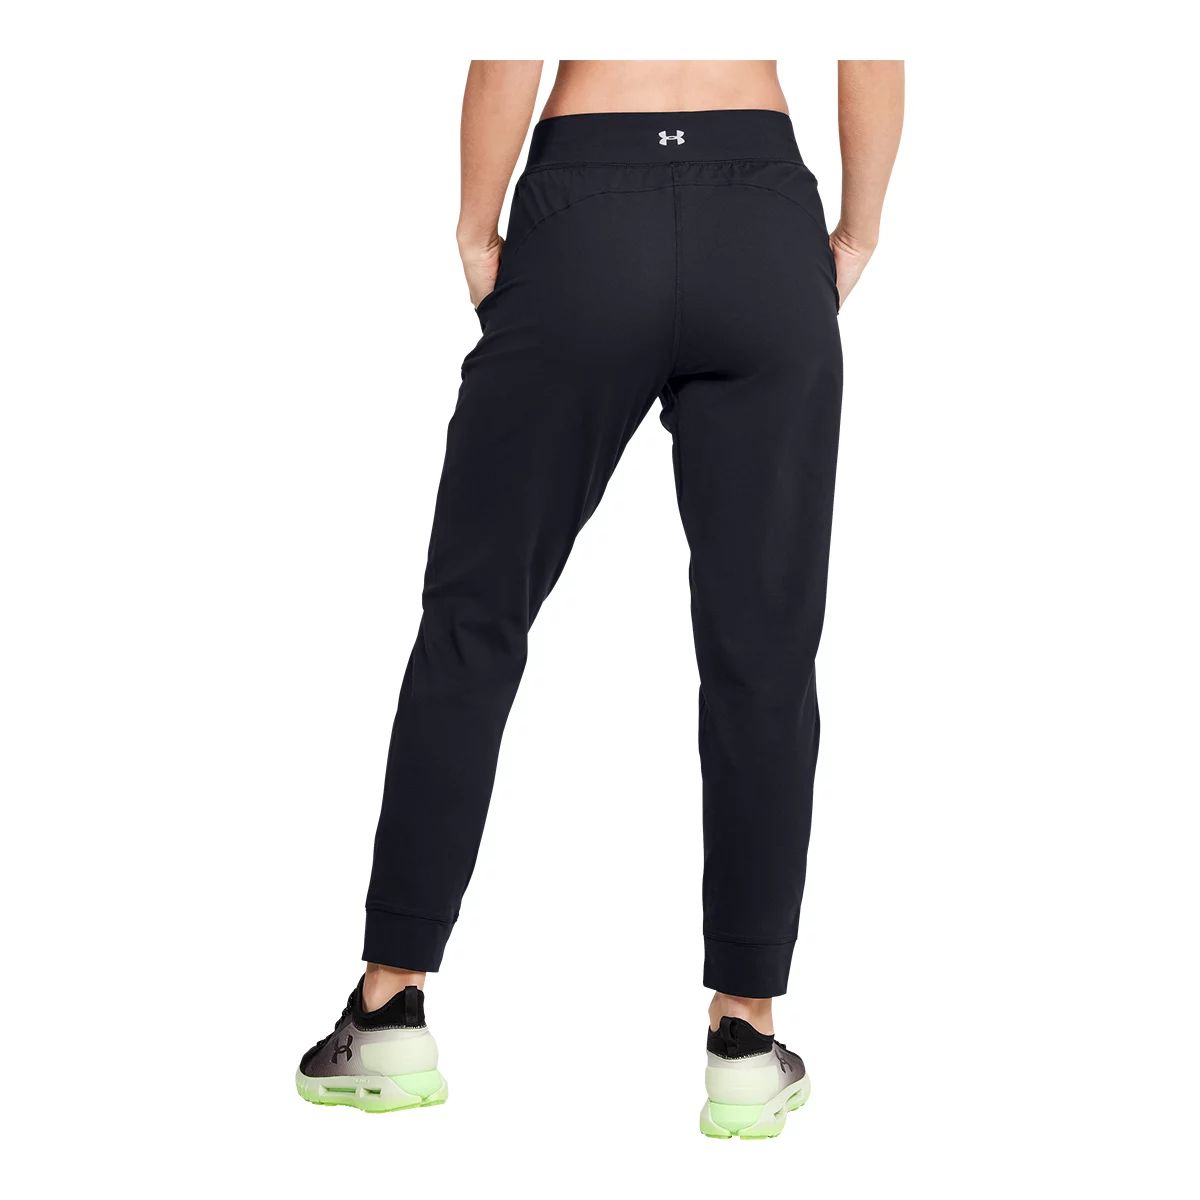 Under Armour Meridian Women Black Training Joggers - XS, Pants,  Sportswear, Under Armour, Under Armour Up to 60% Off